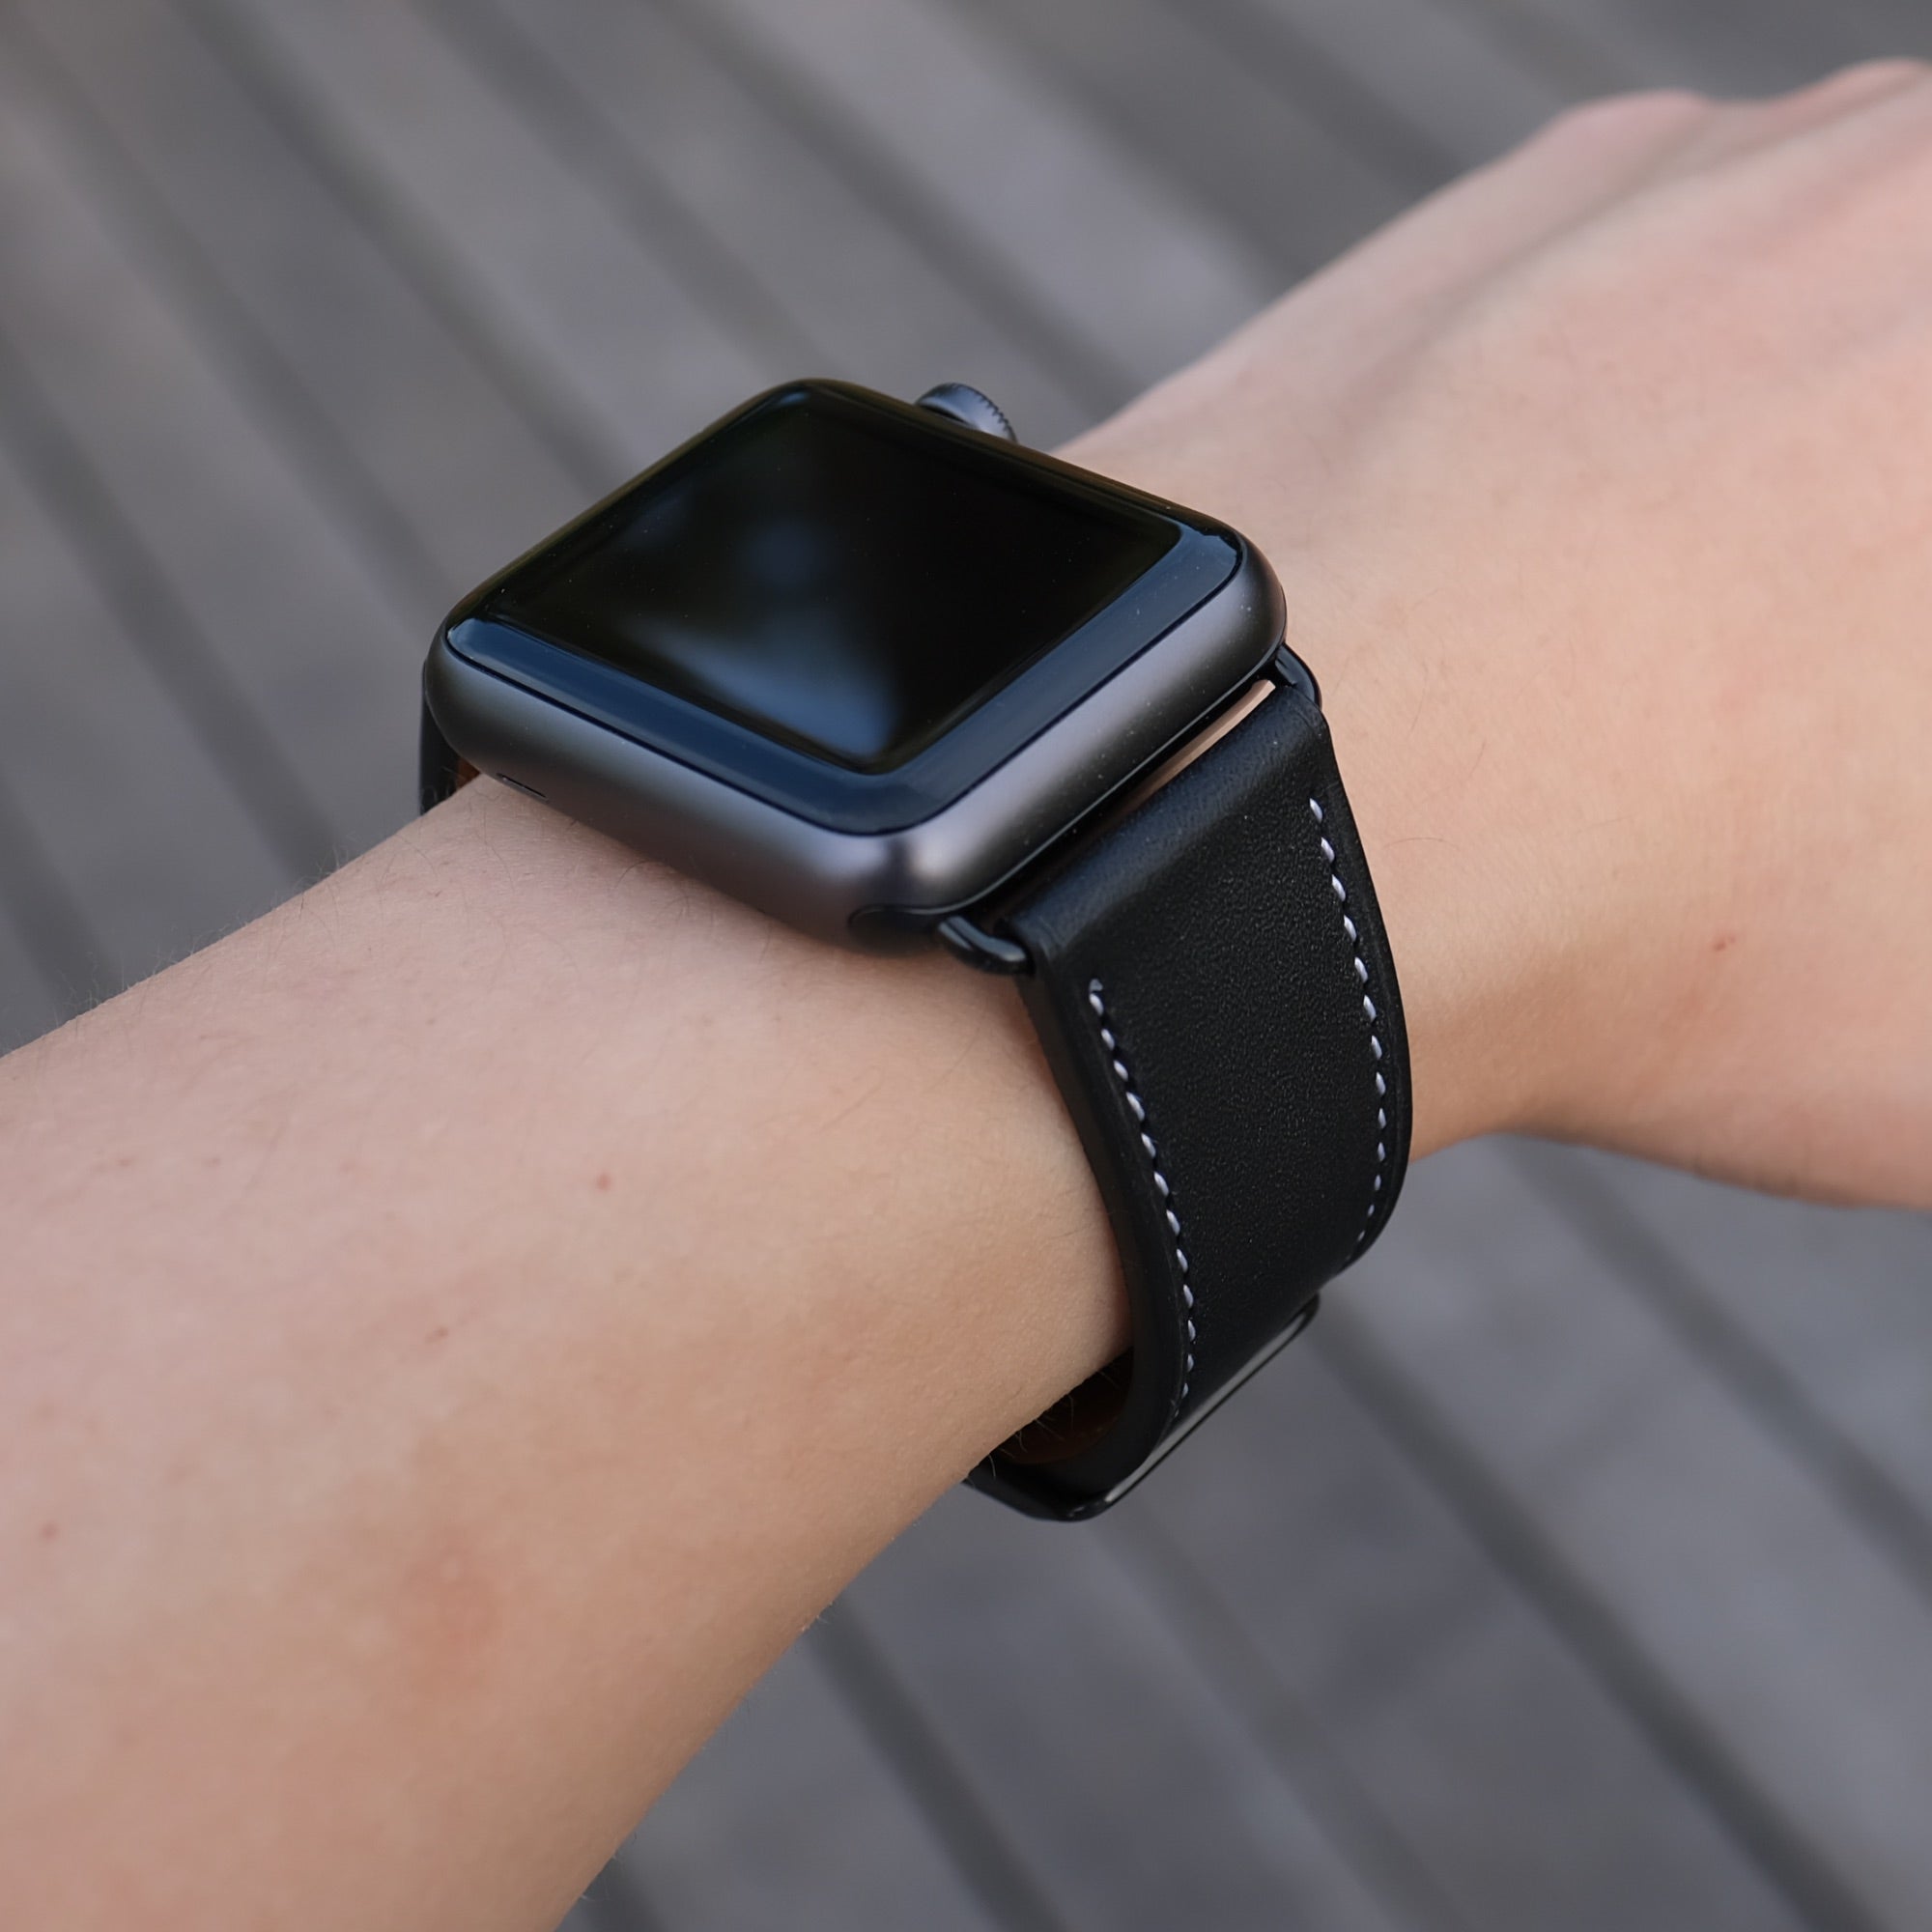 Barenia Leather Apple Watch Bands by Pin & Buckle - Black - Black Stainless Steel Hardware - on Wrist